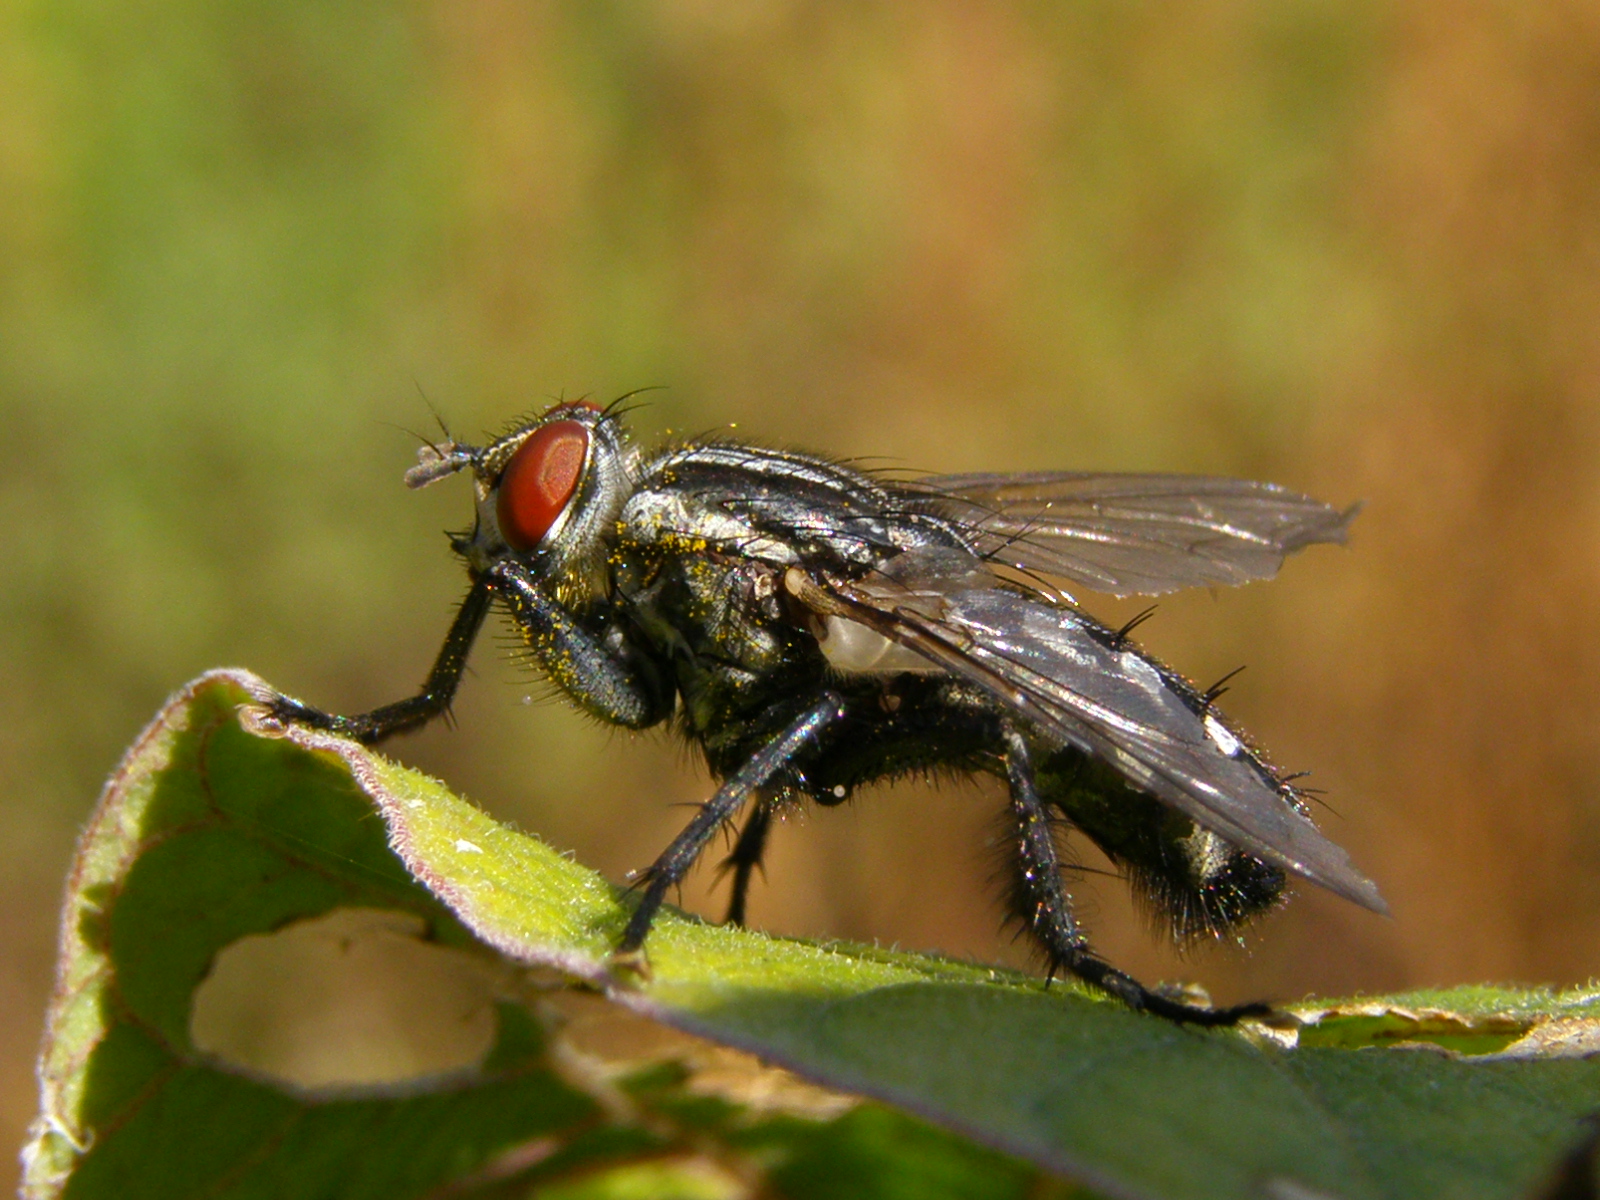 a close up of a fly on a plant leaf